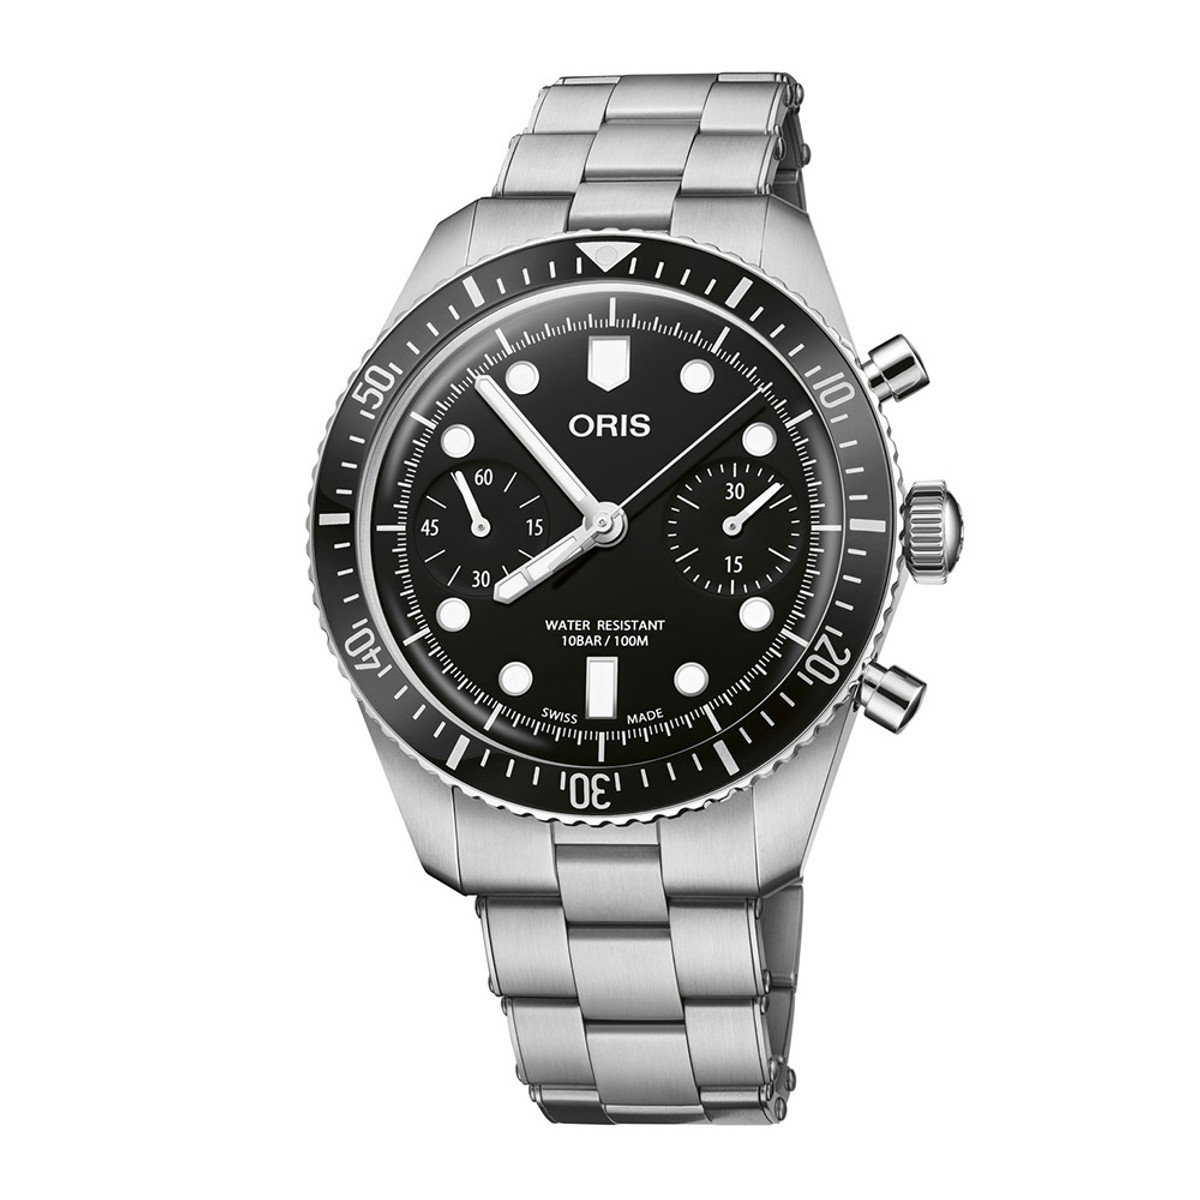 Oris Divers Sixty-Five Chronograph 40mm Ref. 01 771 7791 4054-07 8 20 18-58358 Product Image